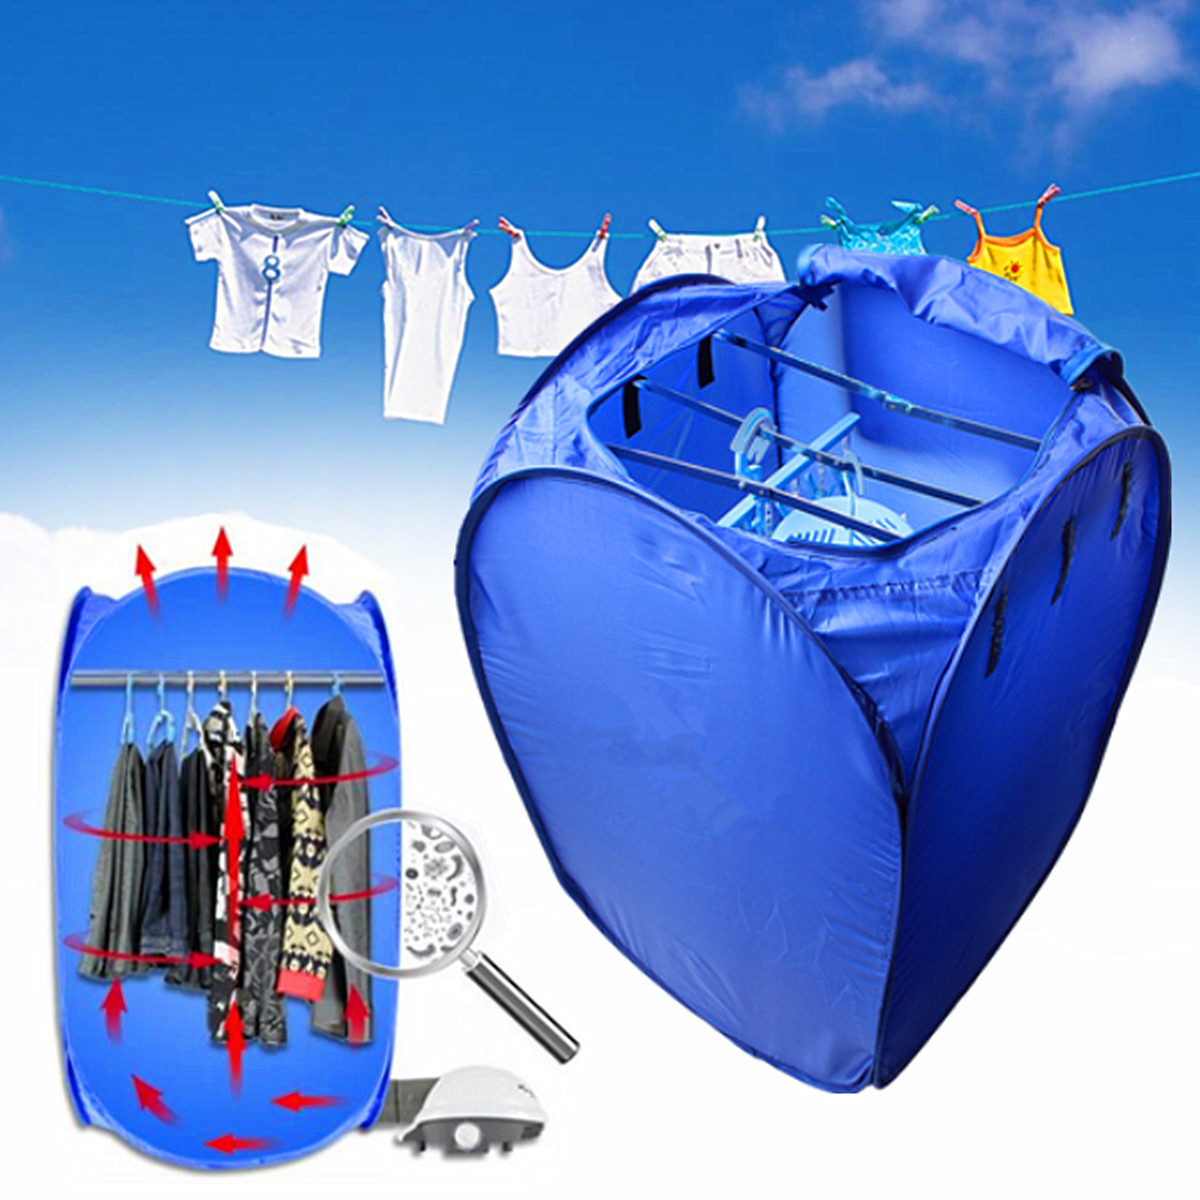 

800W Portable Electric Air Clothes Dryer Folding Fast Drying Machine Bag Box